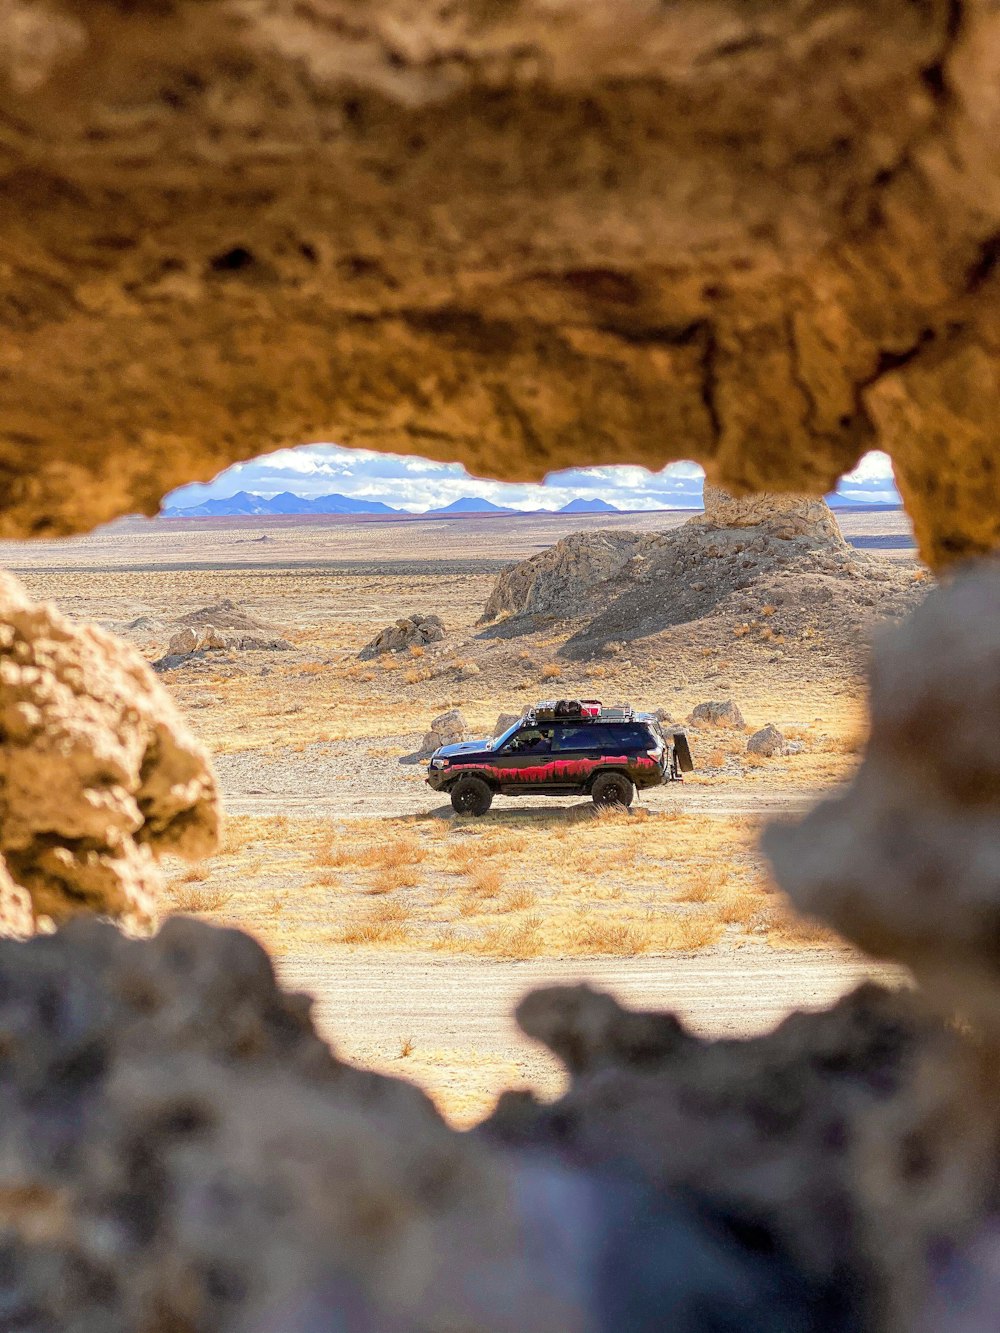 a car is parked in the middle of the desert